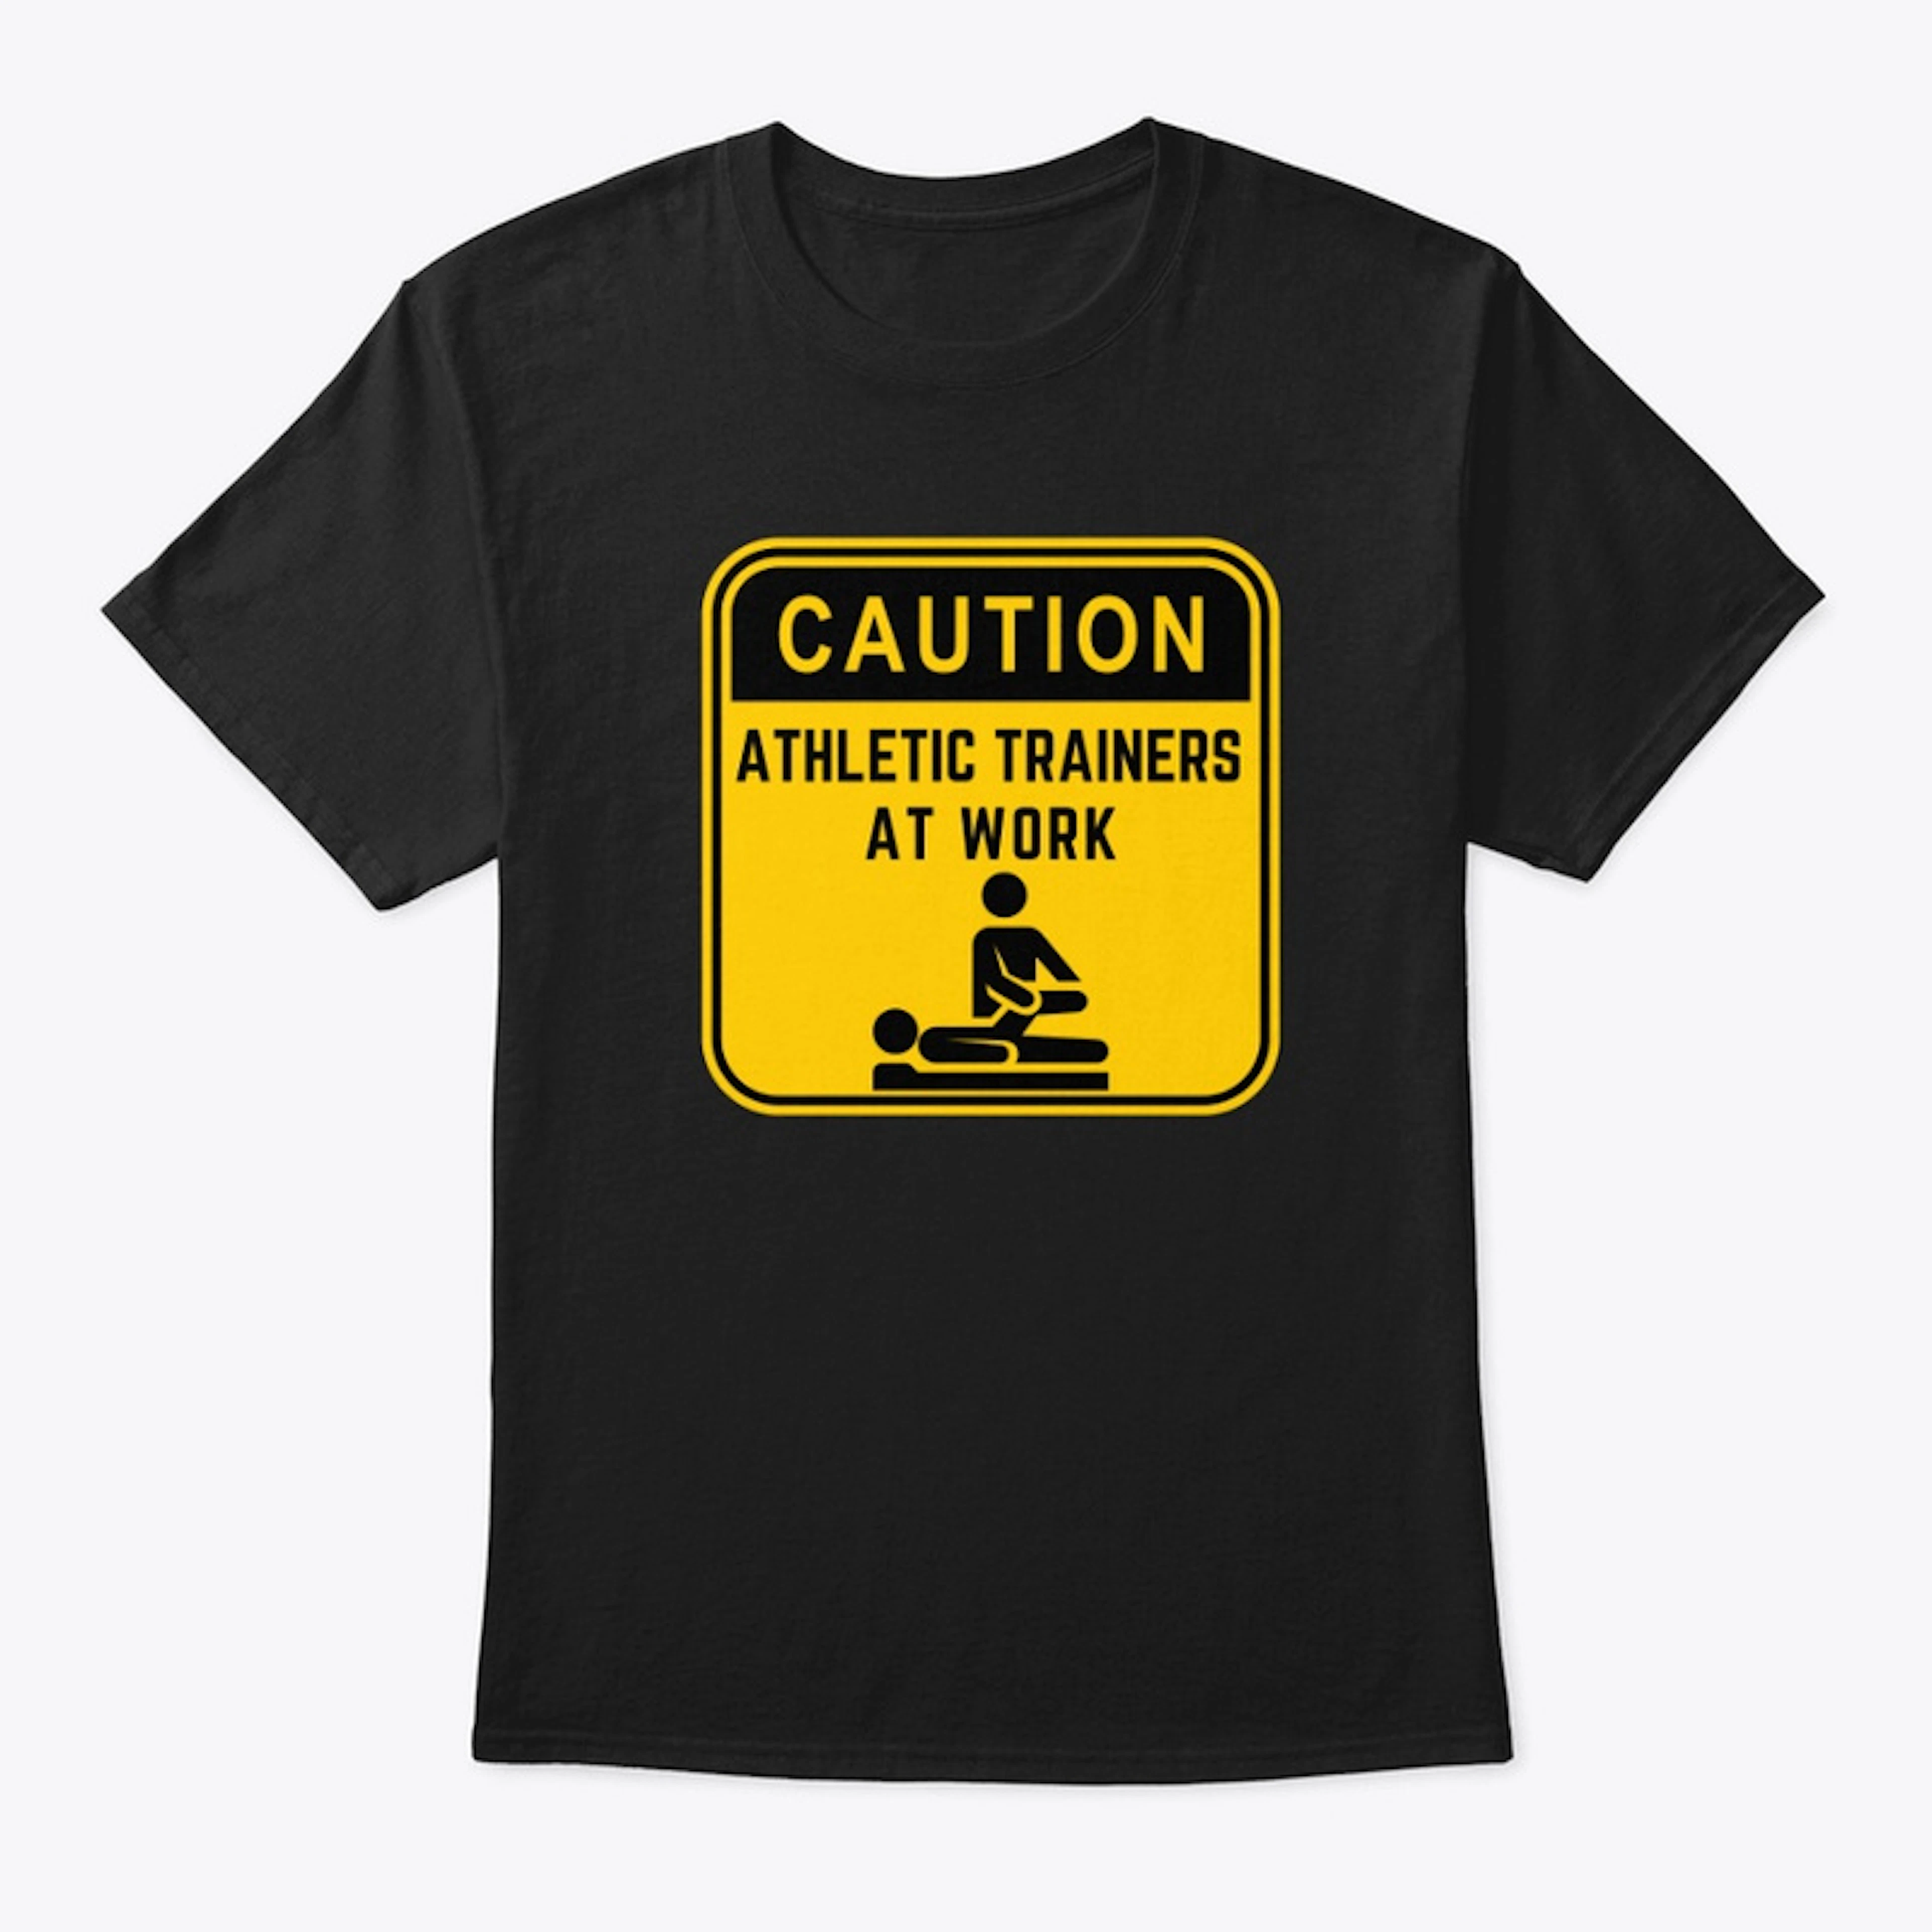 Caution - Athletic Trainers at Work Tee